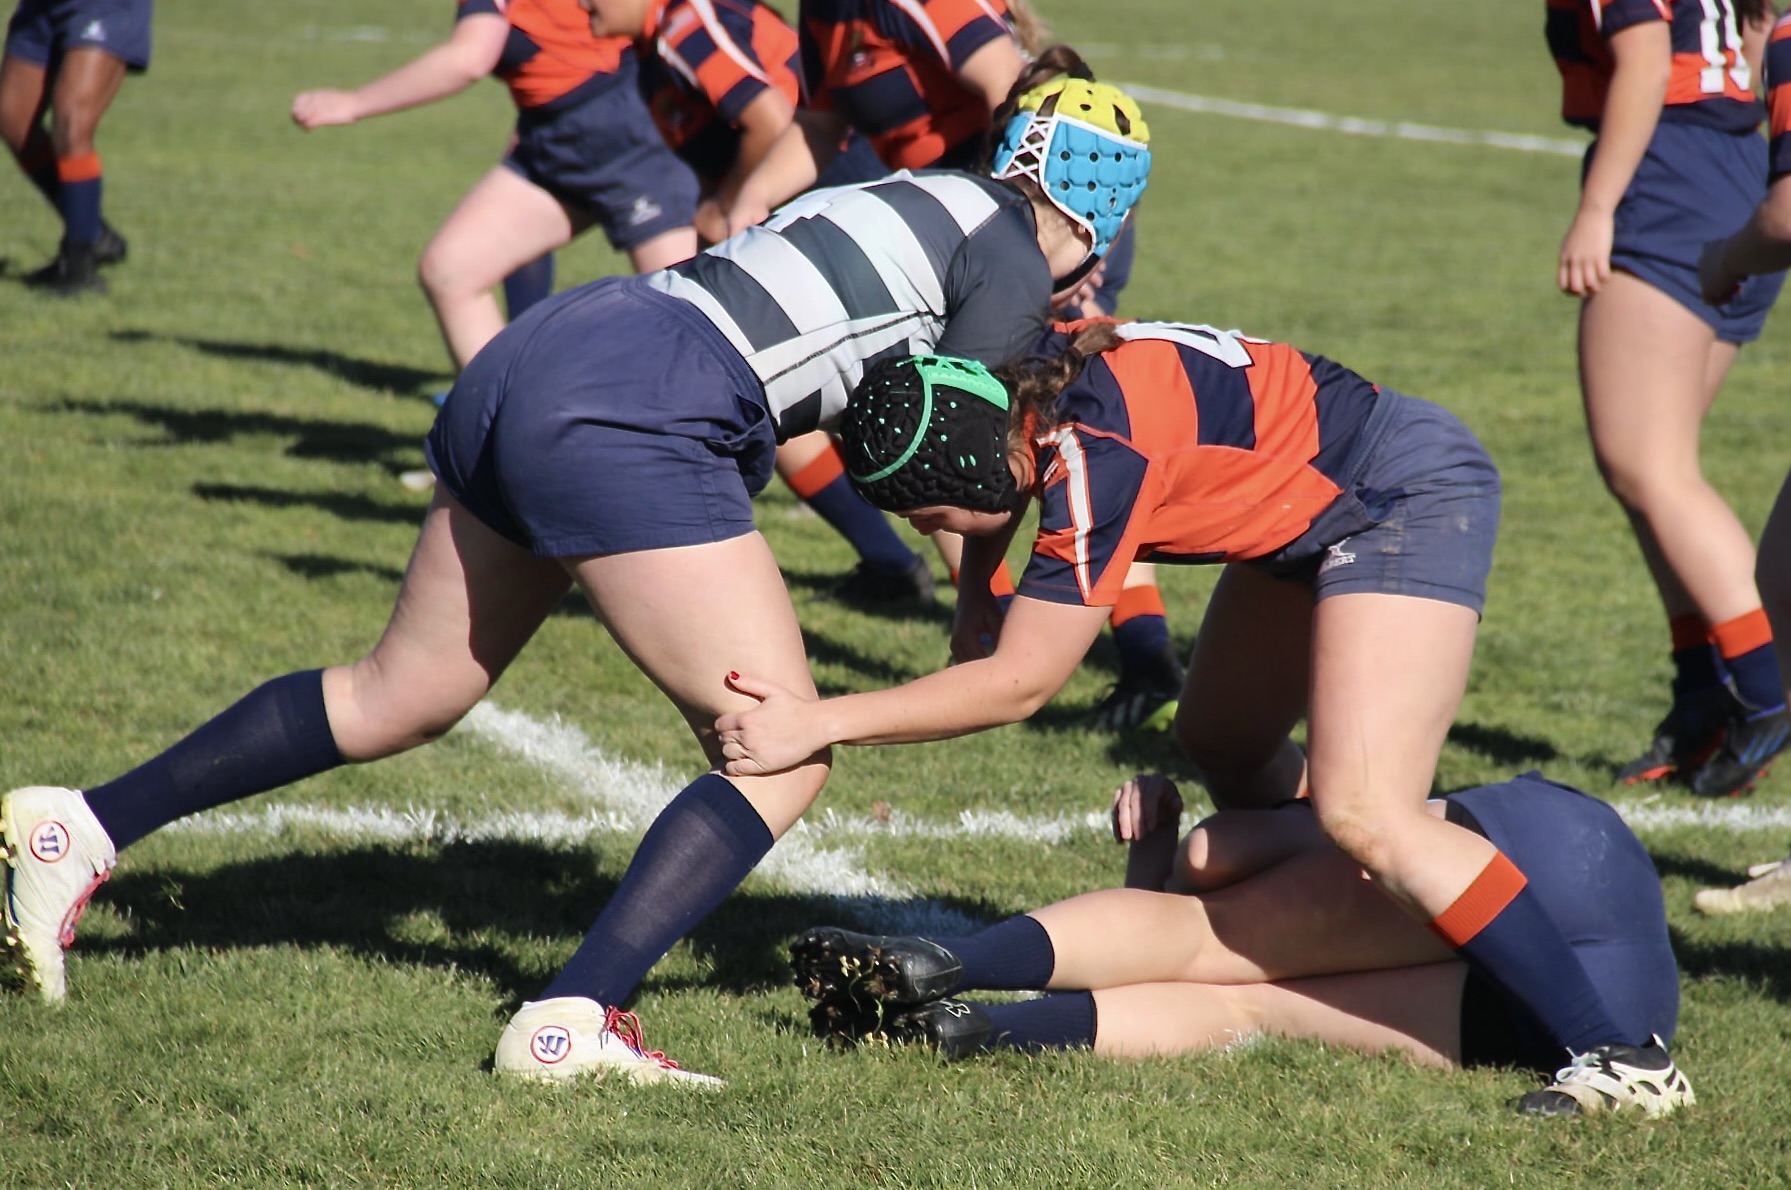 USCG rugby